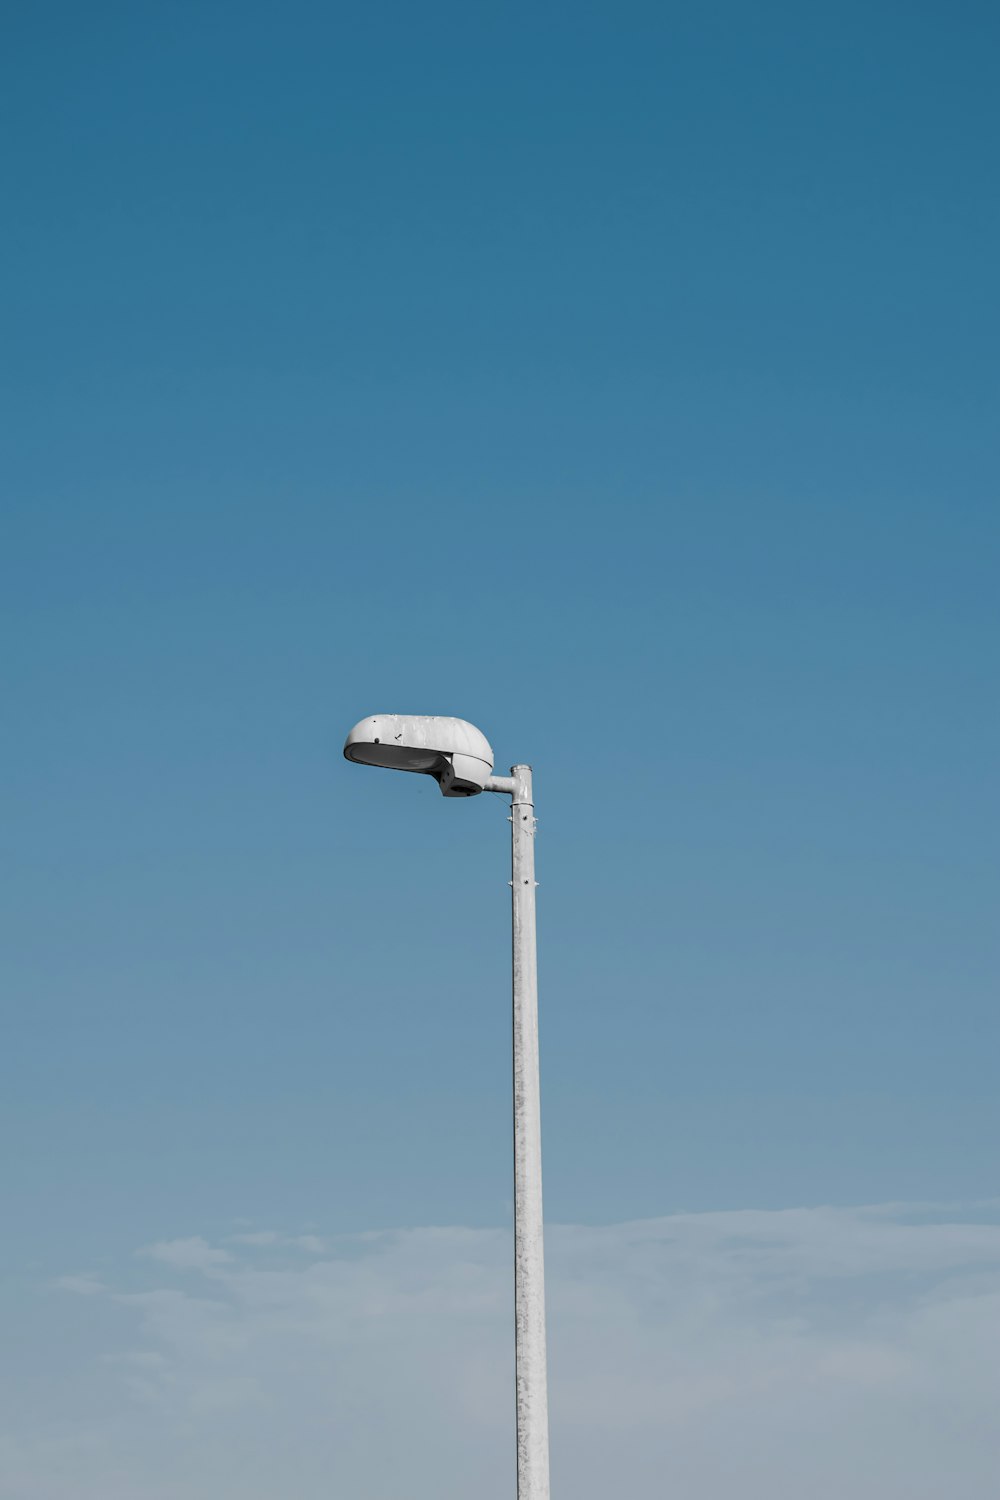 a light post with a satellite dish on top